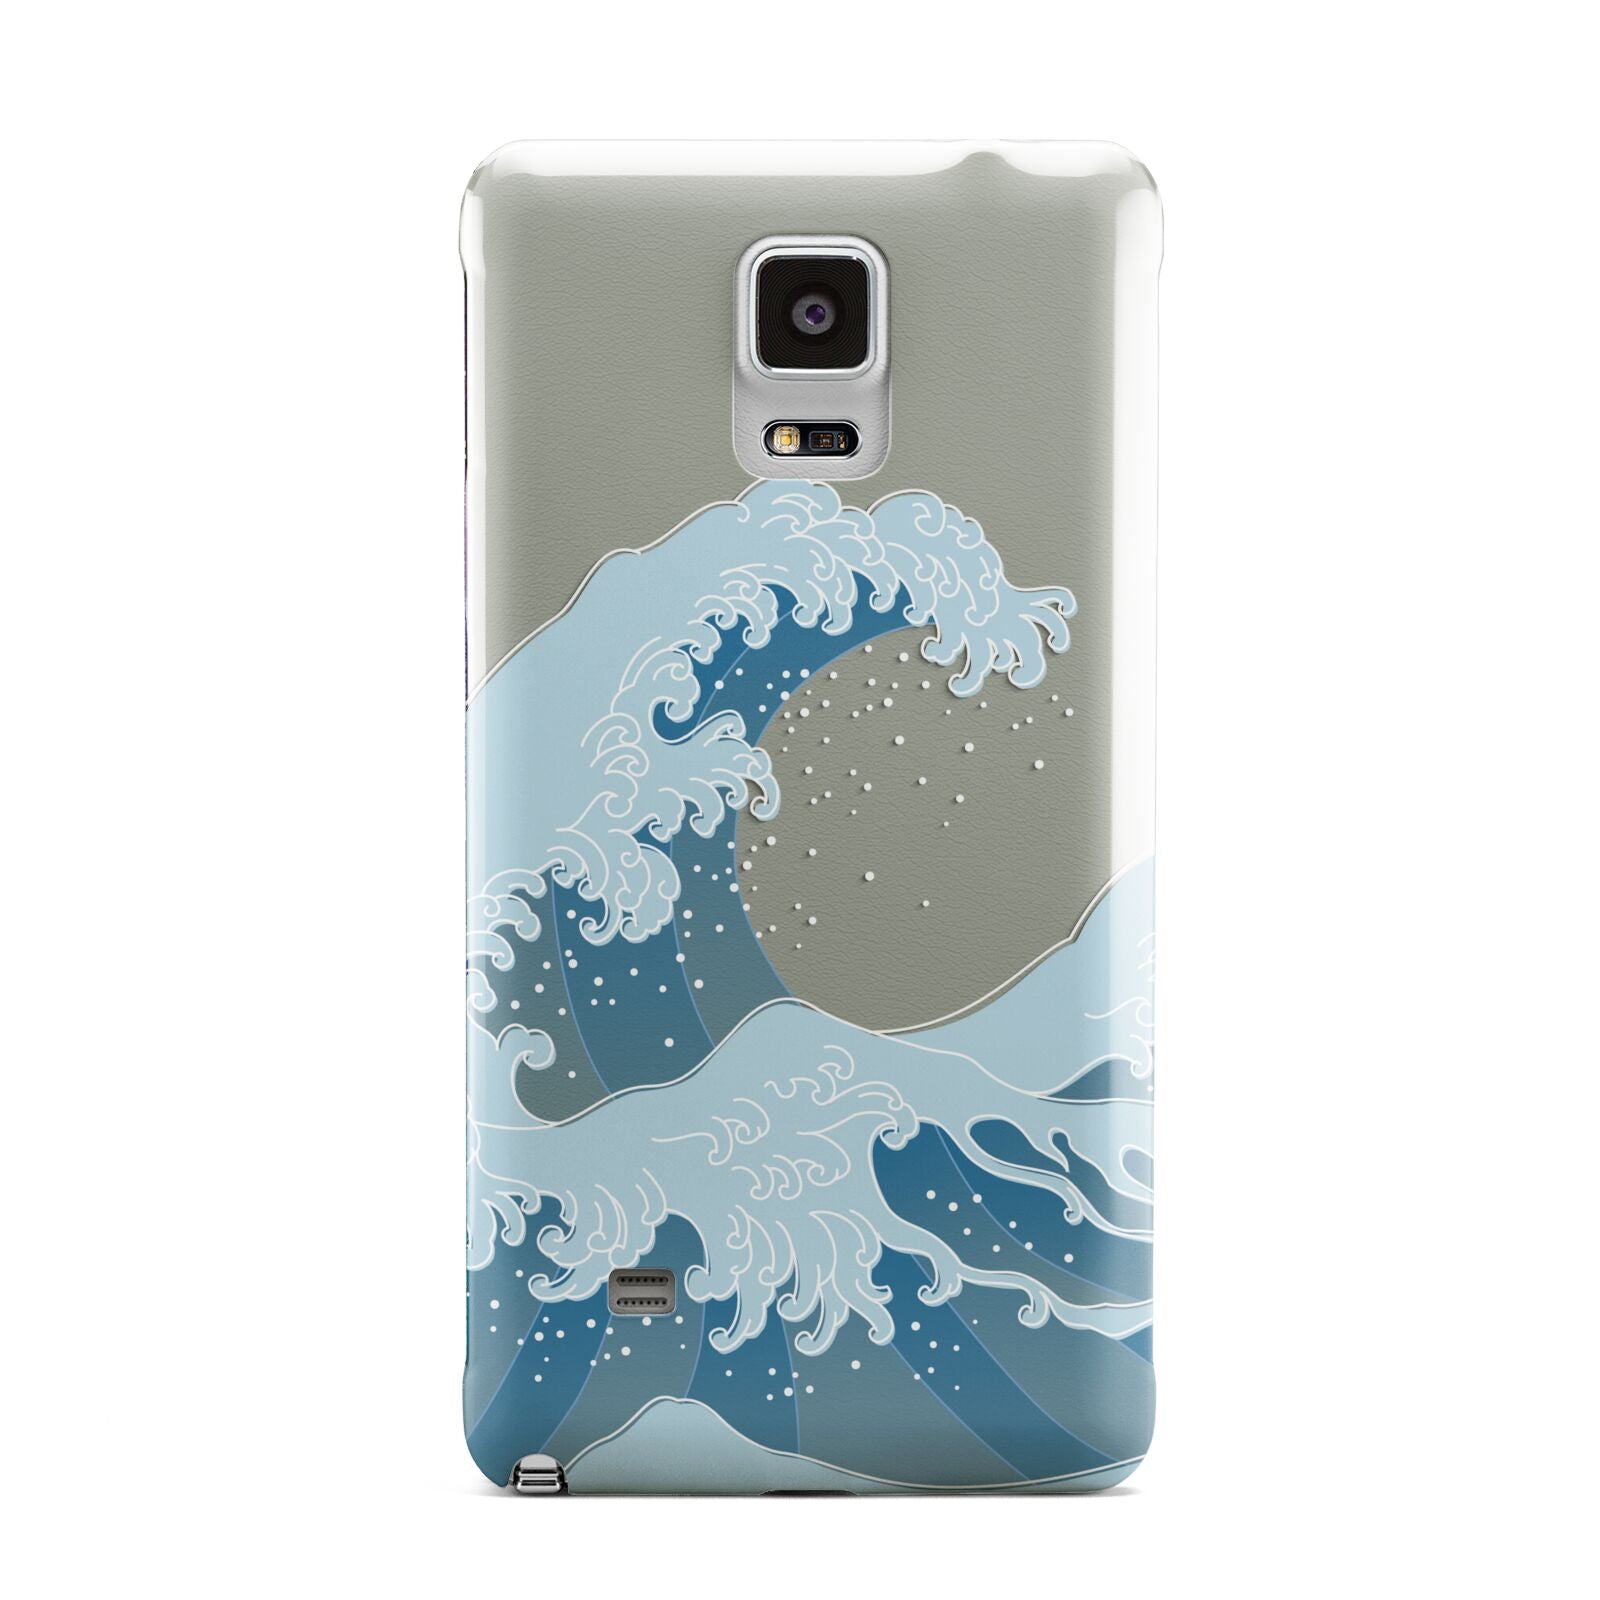 Great Wave Illustration Samsung Galaxy Note 4 Case